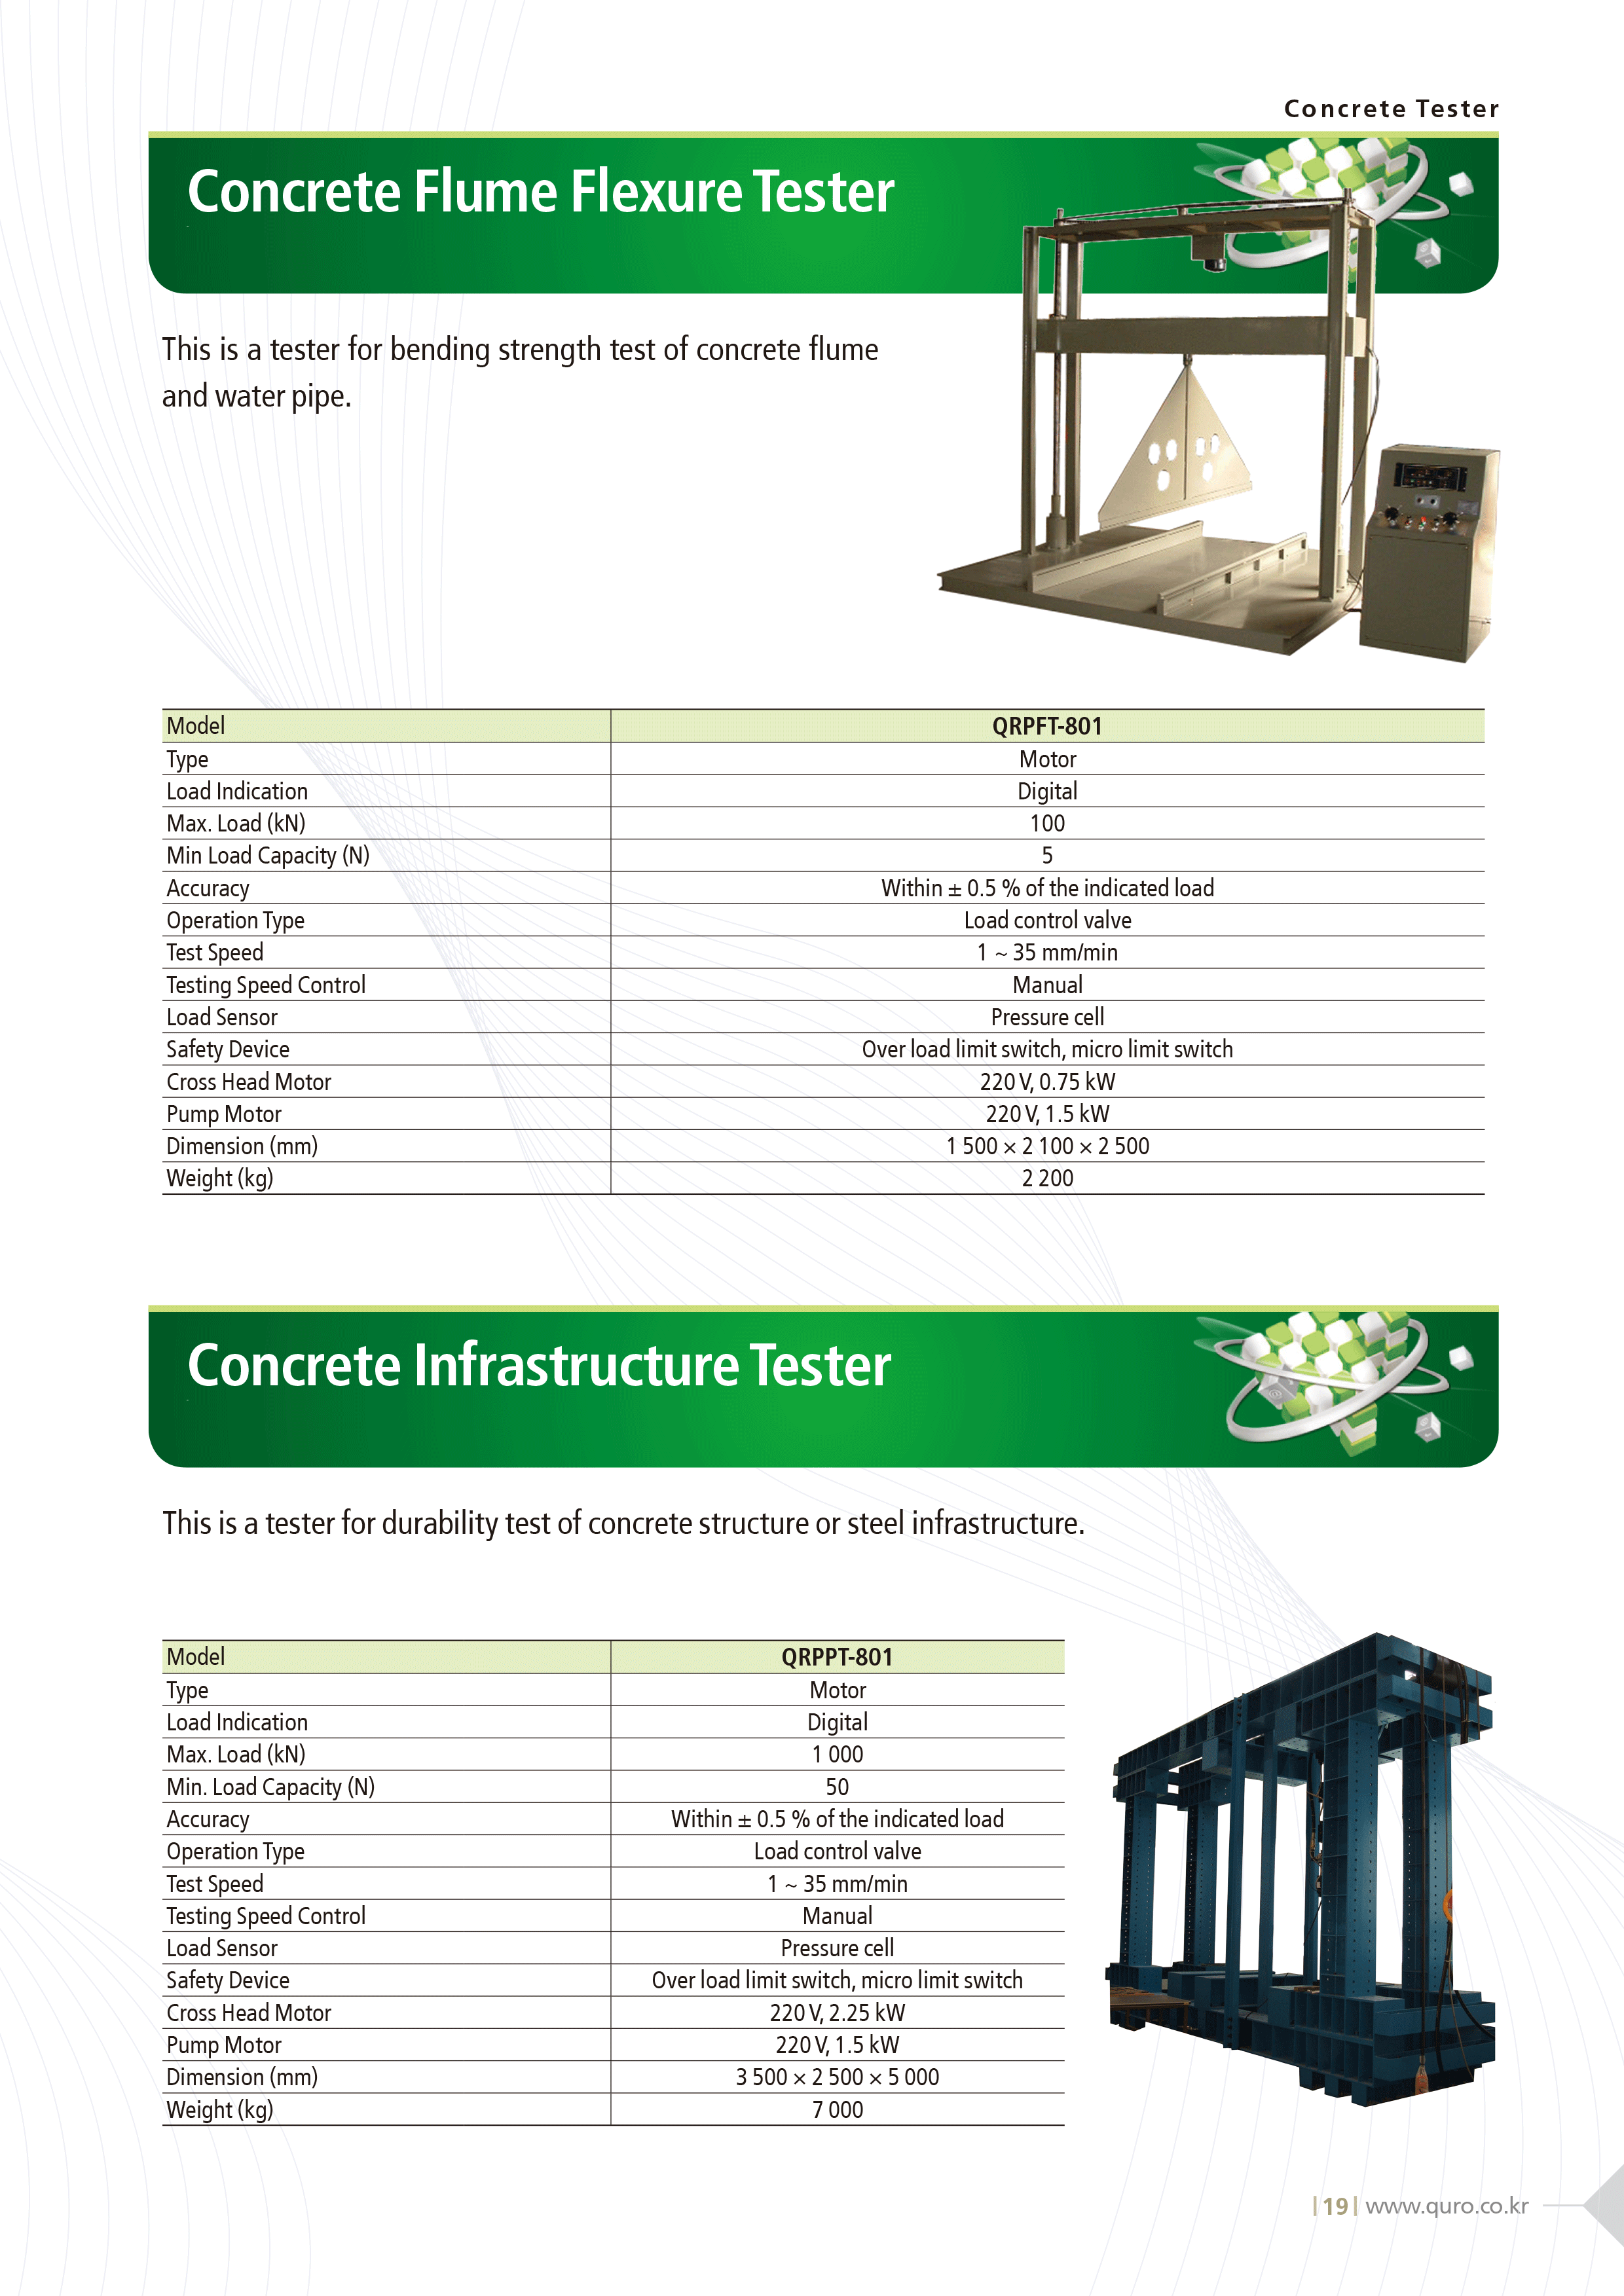 Concrete_Infrastructure_Tester.gif